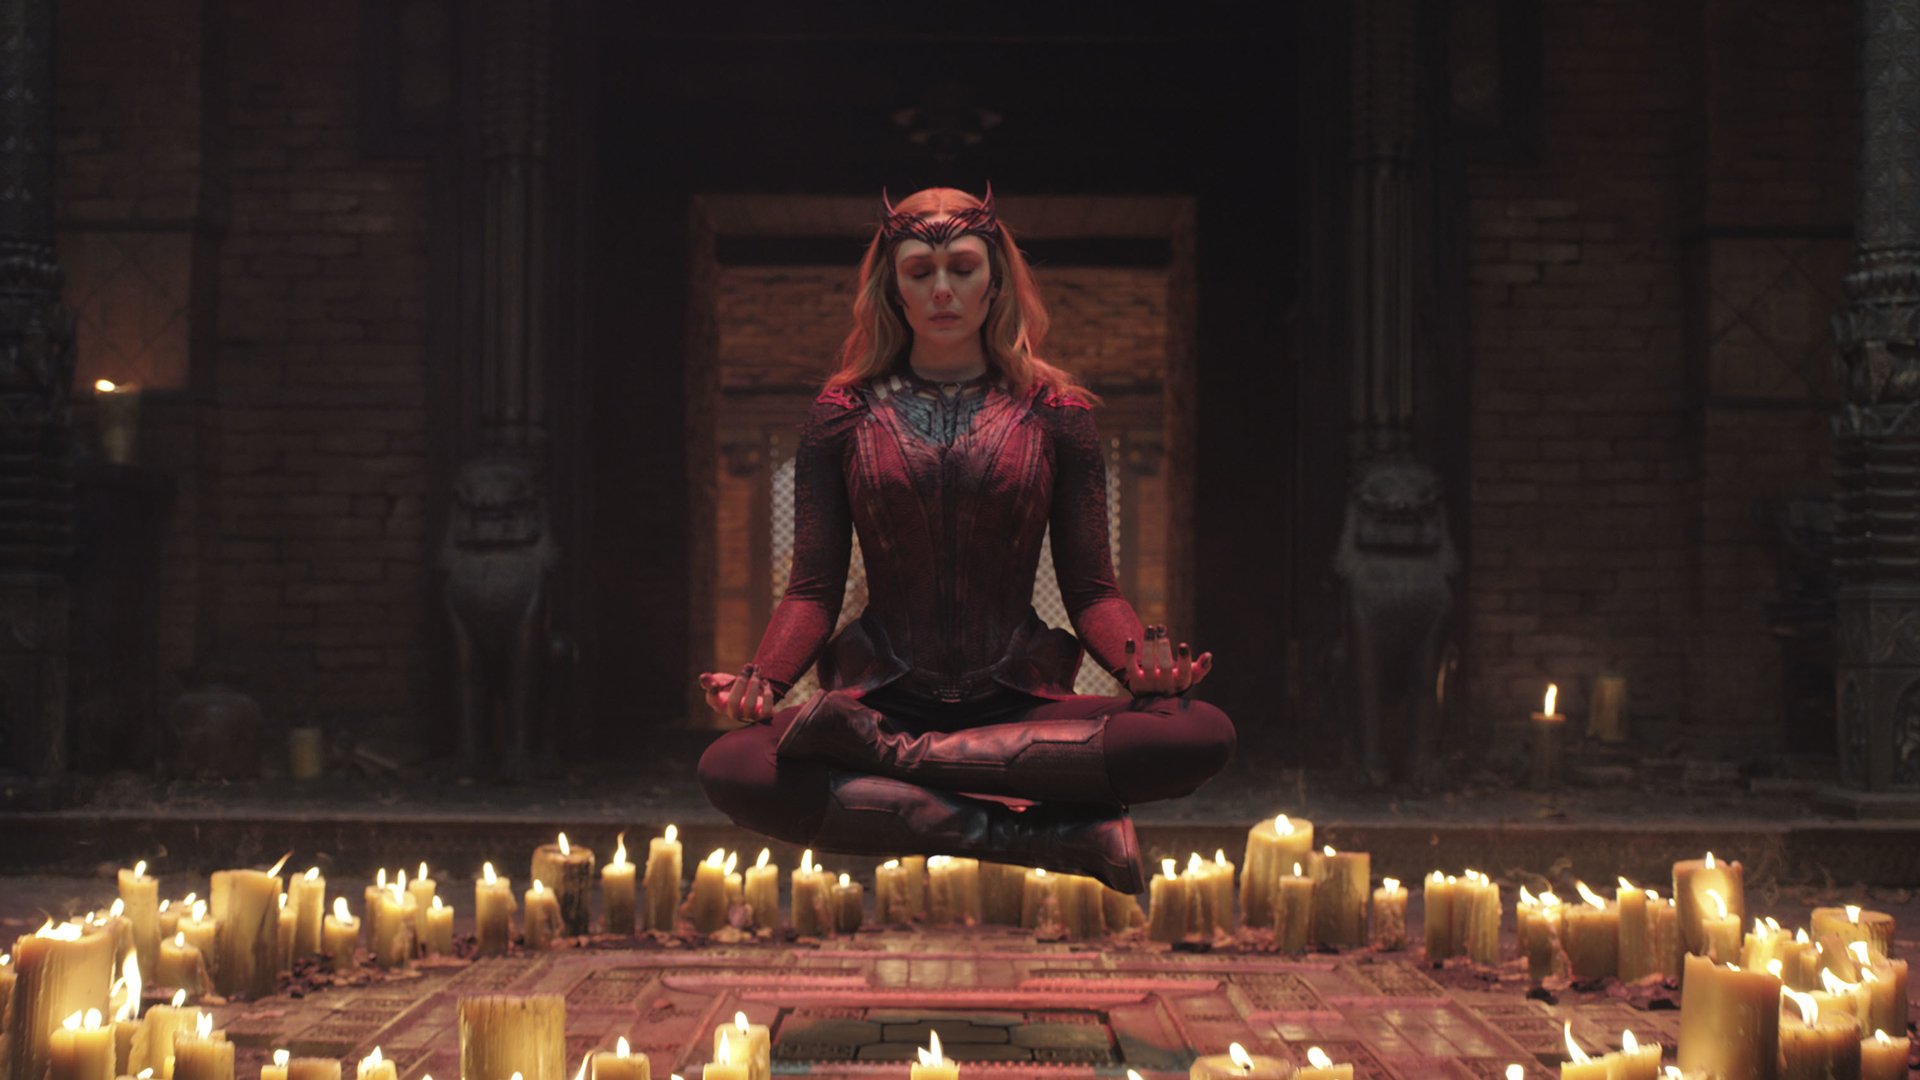 A superhero meditates while floating over candles.